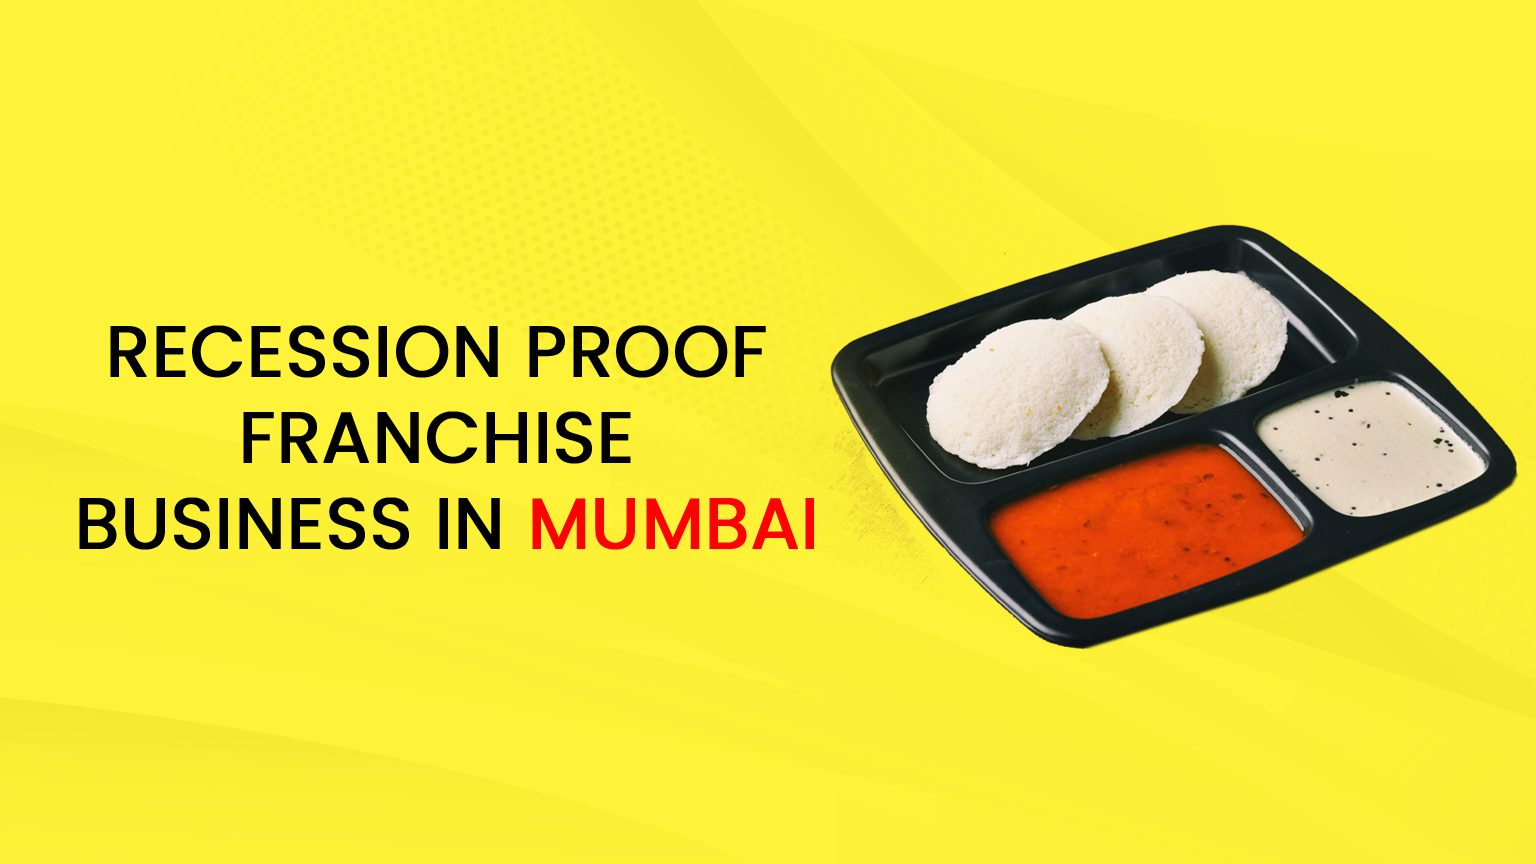 7 recession proof franchise business in Mumbai that you can start in 2022